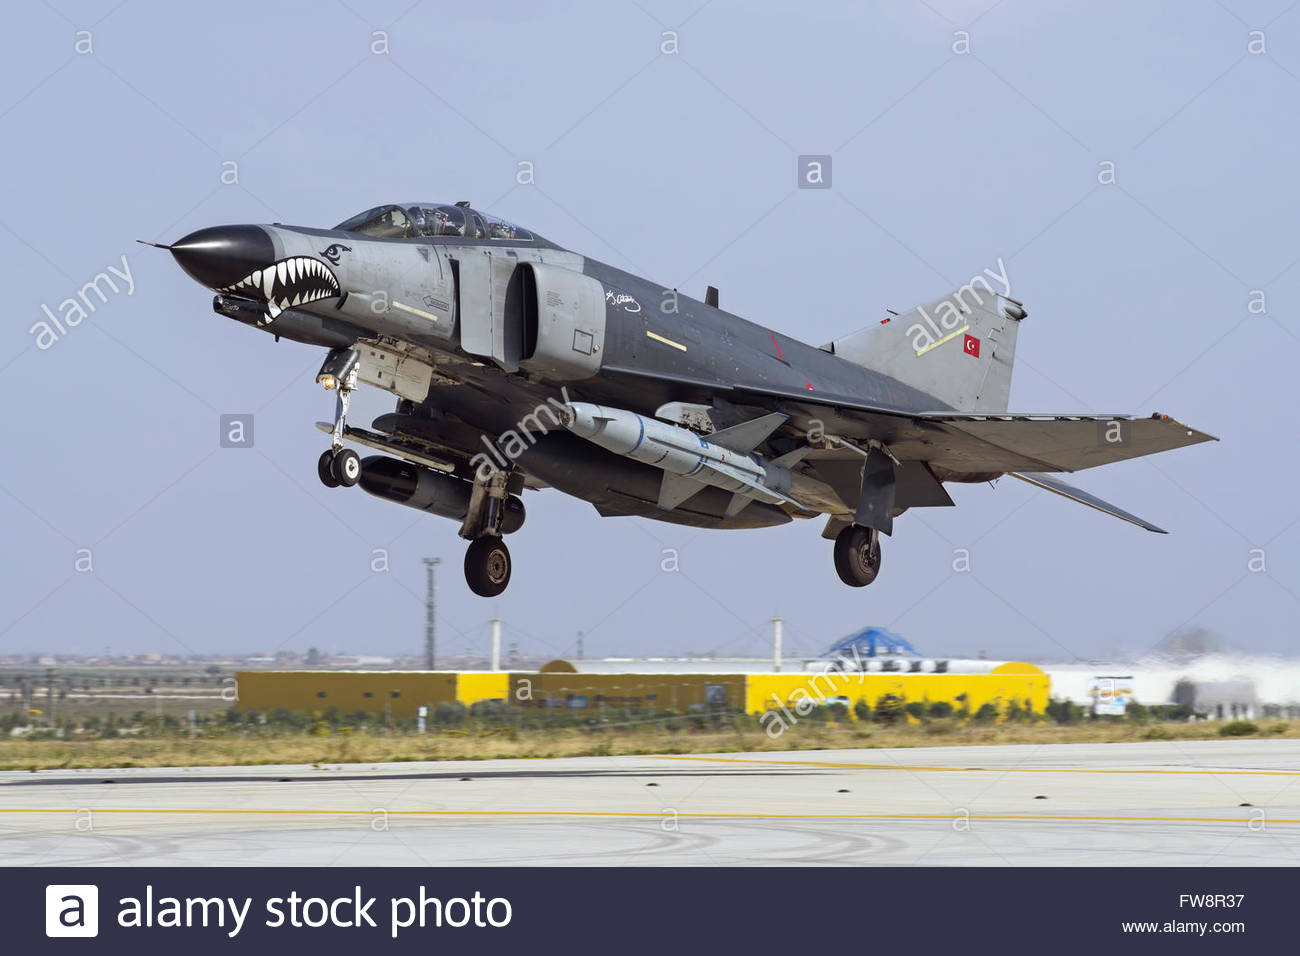 a-turkish-air-force-f-4e-2020-terminator-equipped-with-the-agm-142-FW8R37.jpg